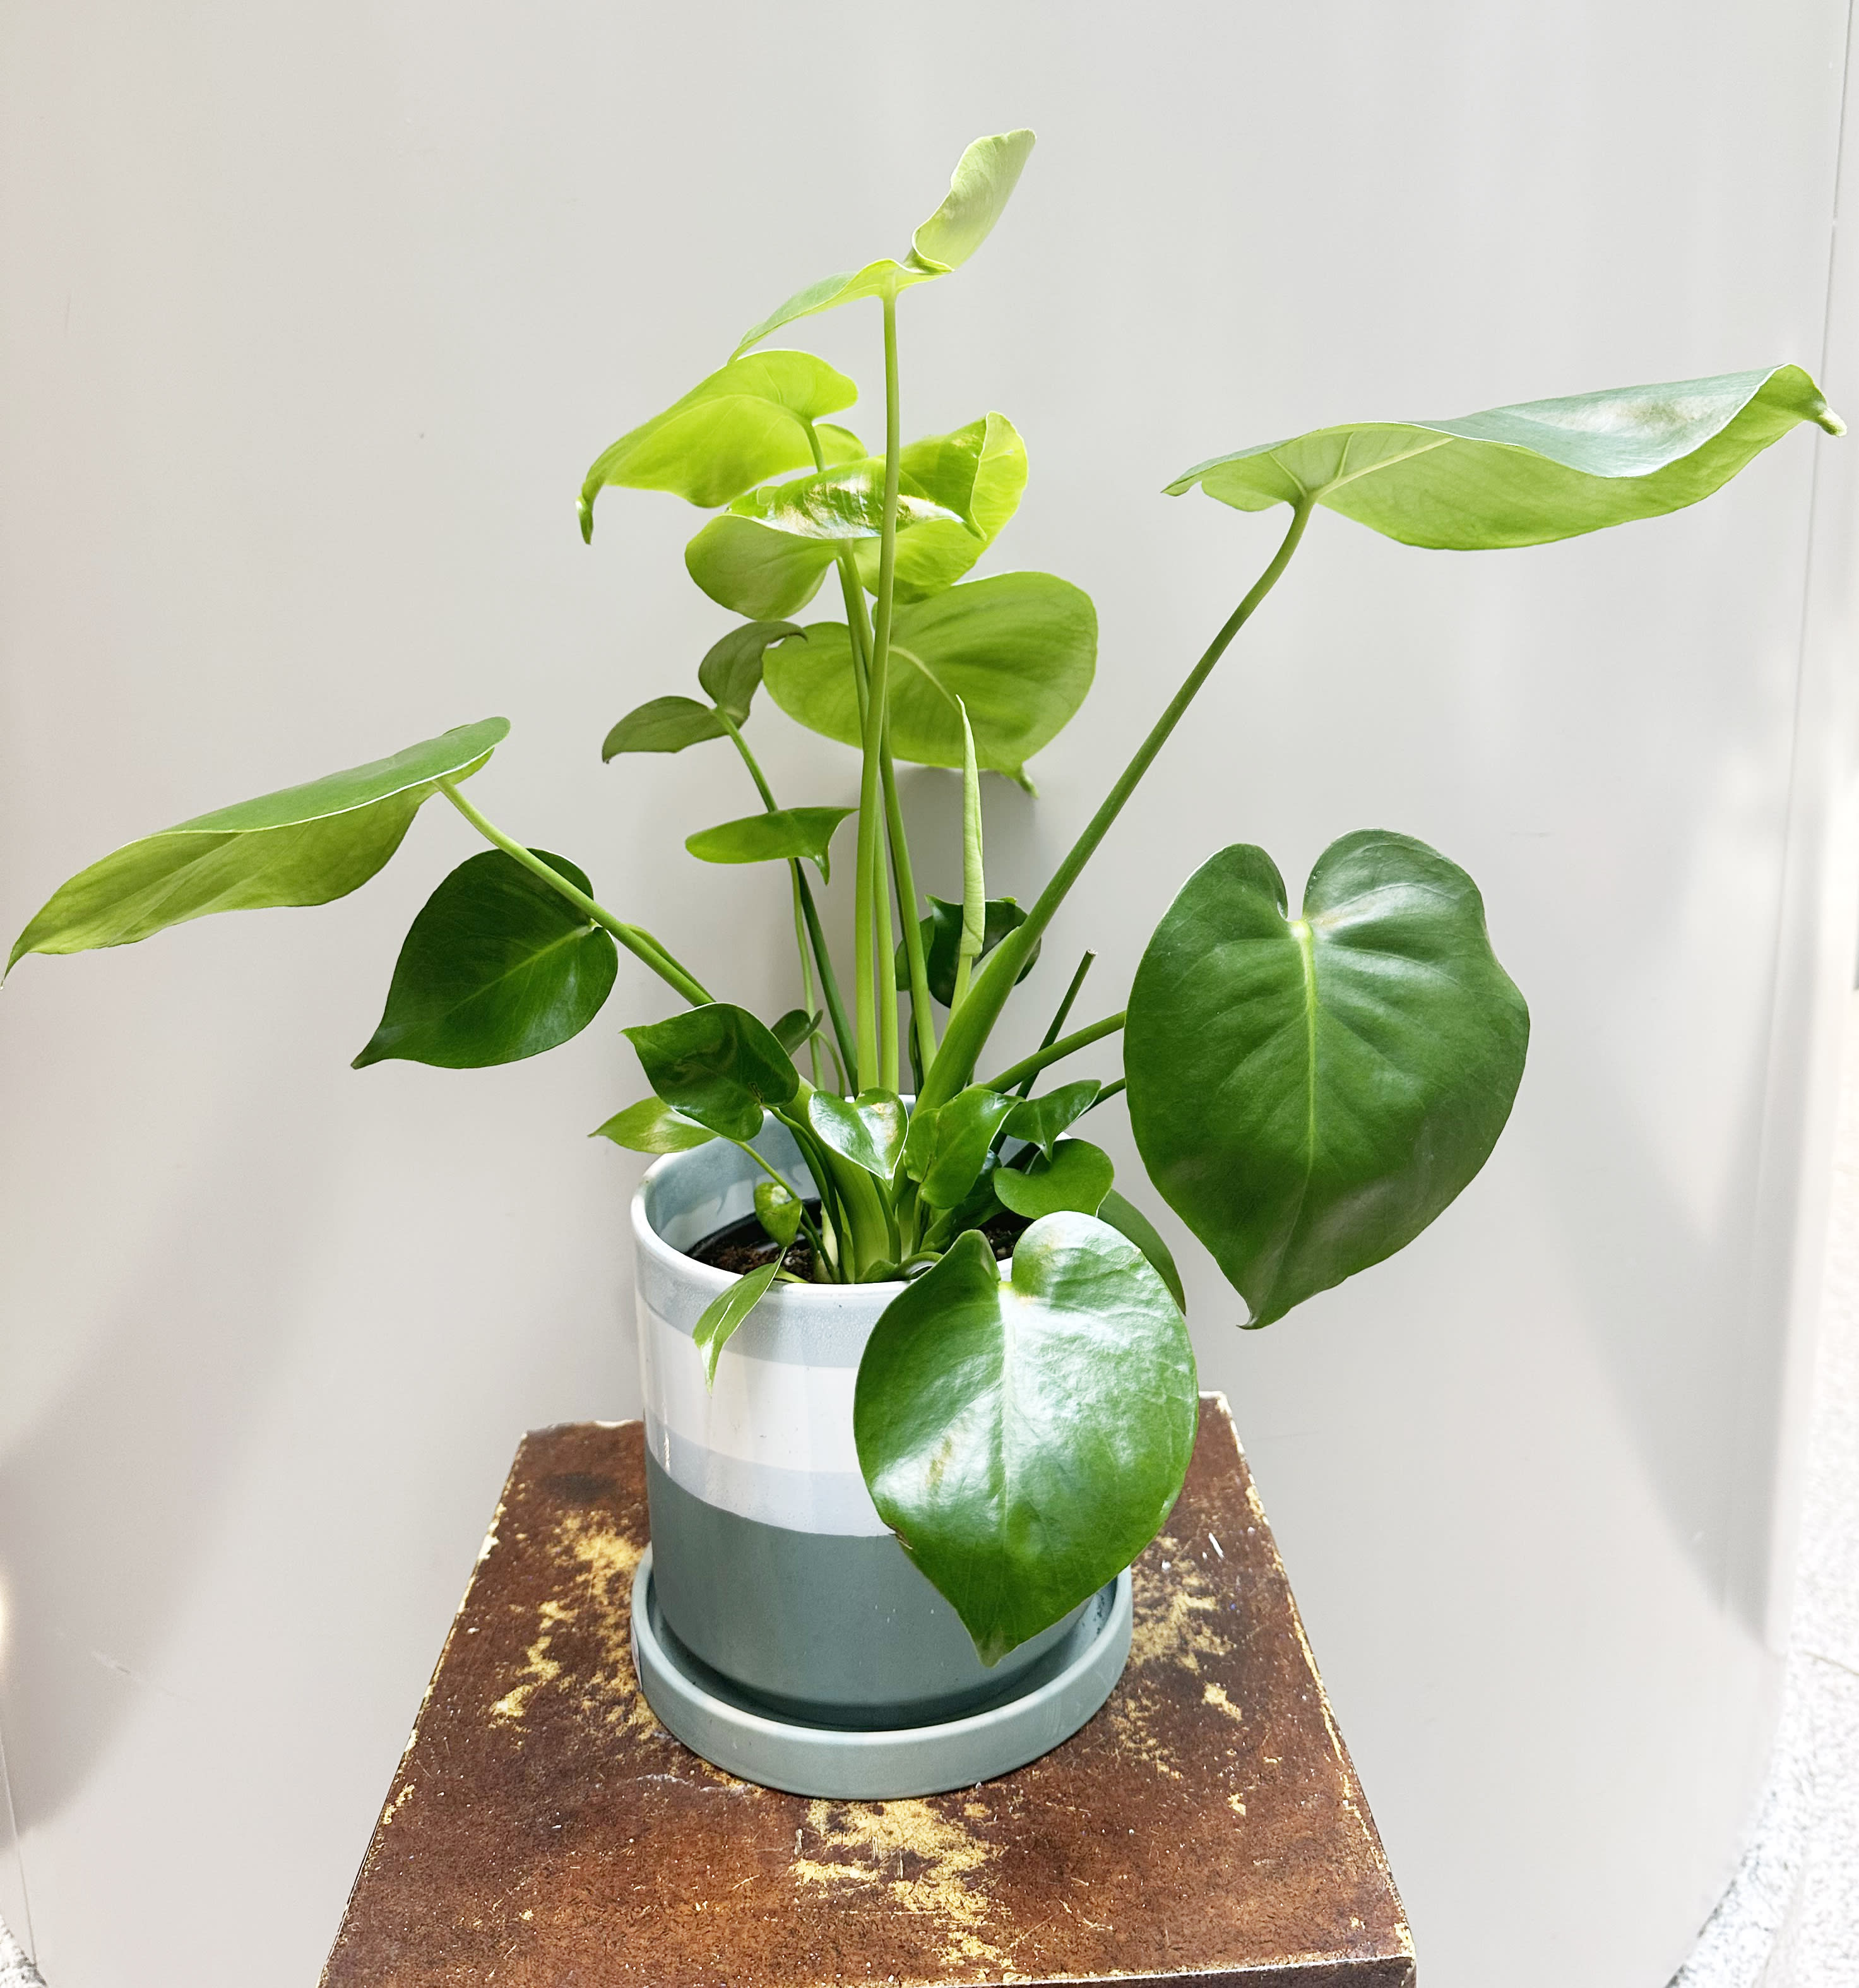 Monstera Plant  - Monstera is very easy to take care. It benefit for indoor  air quality.  